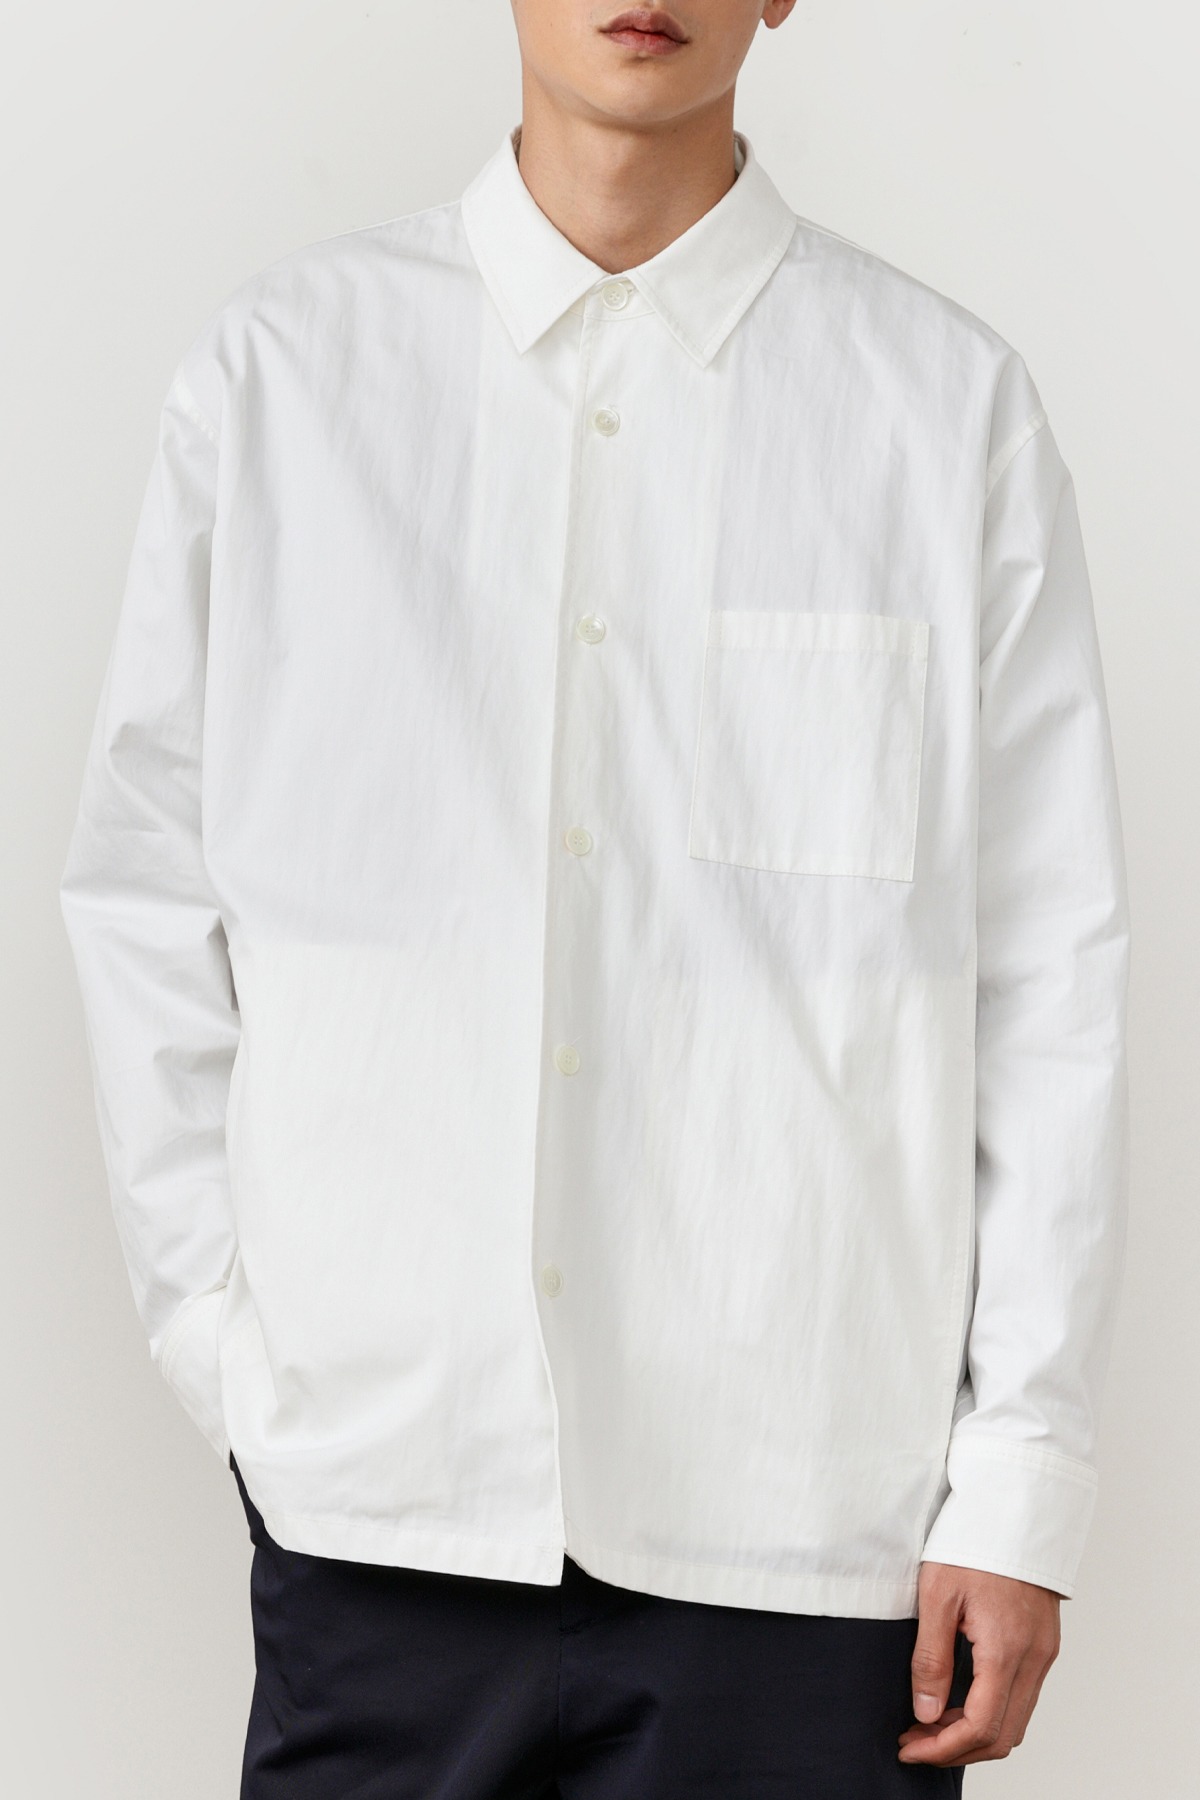 [Restock] Compact Outer Shirt_WHITE